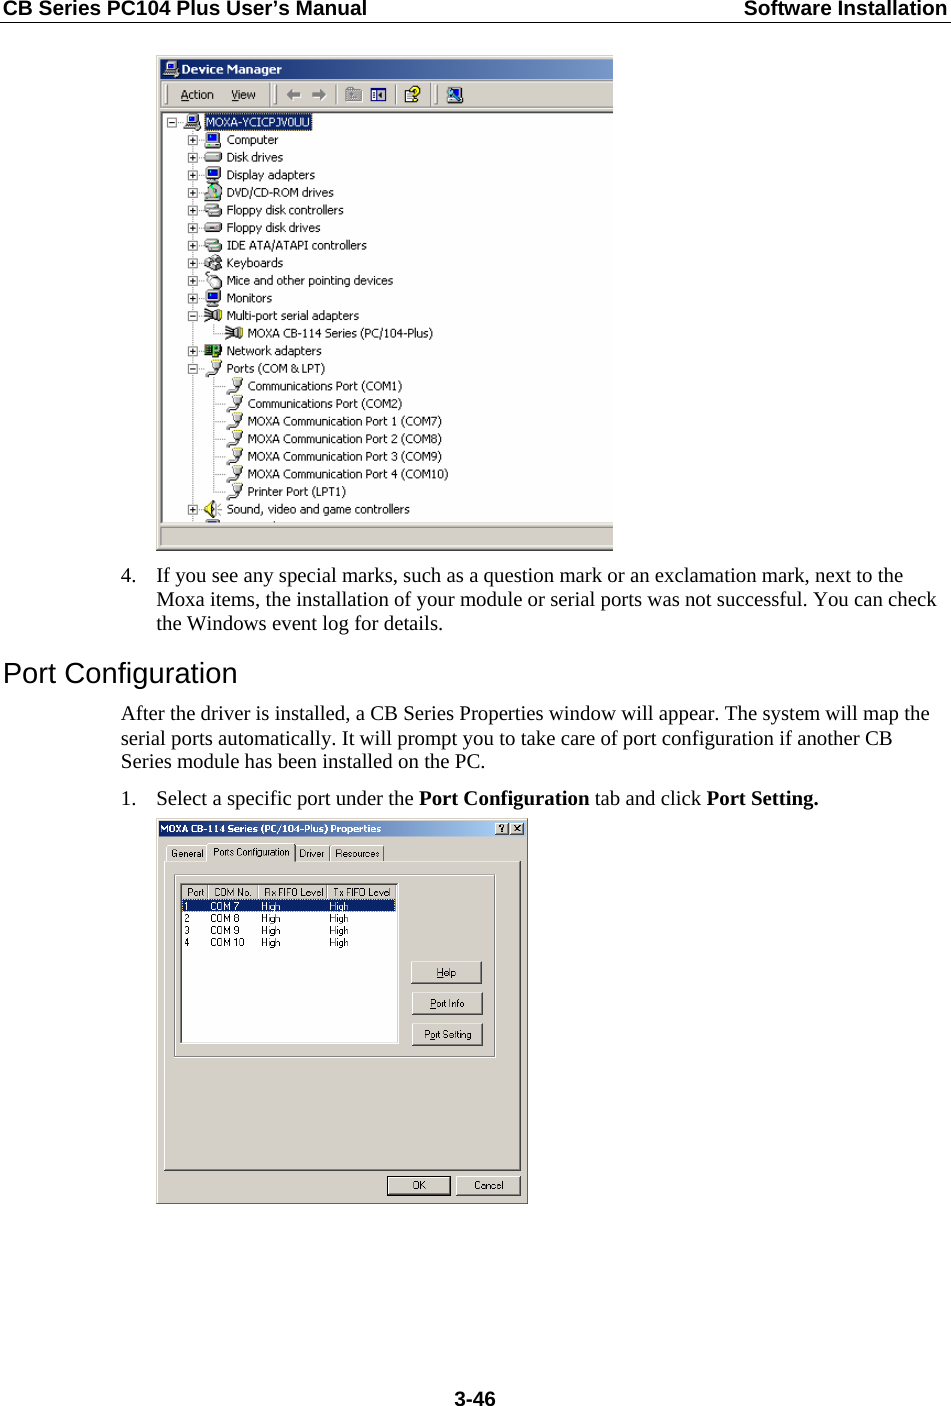 CB Series PC104 Plus User’s Manual  Software Installation  4. If you see any special marks, such as a question mark or an exclamation mark, next to the Moxa items, the installation of your module or serial ports was not successful. You can check the Windows event log for details. Port Configuration After the driver is installed, a CB Series Properties window will appear. The system will map the serial ports automatically. It will prompt you to take care of port configuration if another CB Series module has been installed on the PC. 1. Select a specific port under the Port Configuration tab and click Port Setting.   3-46